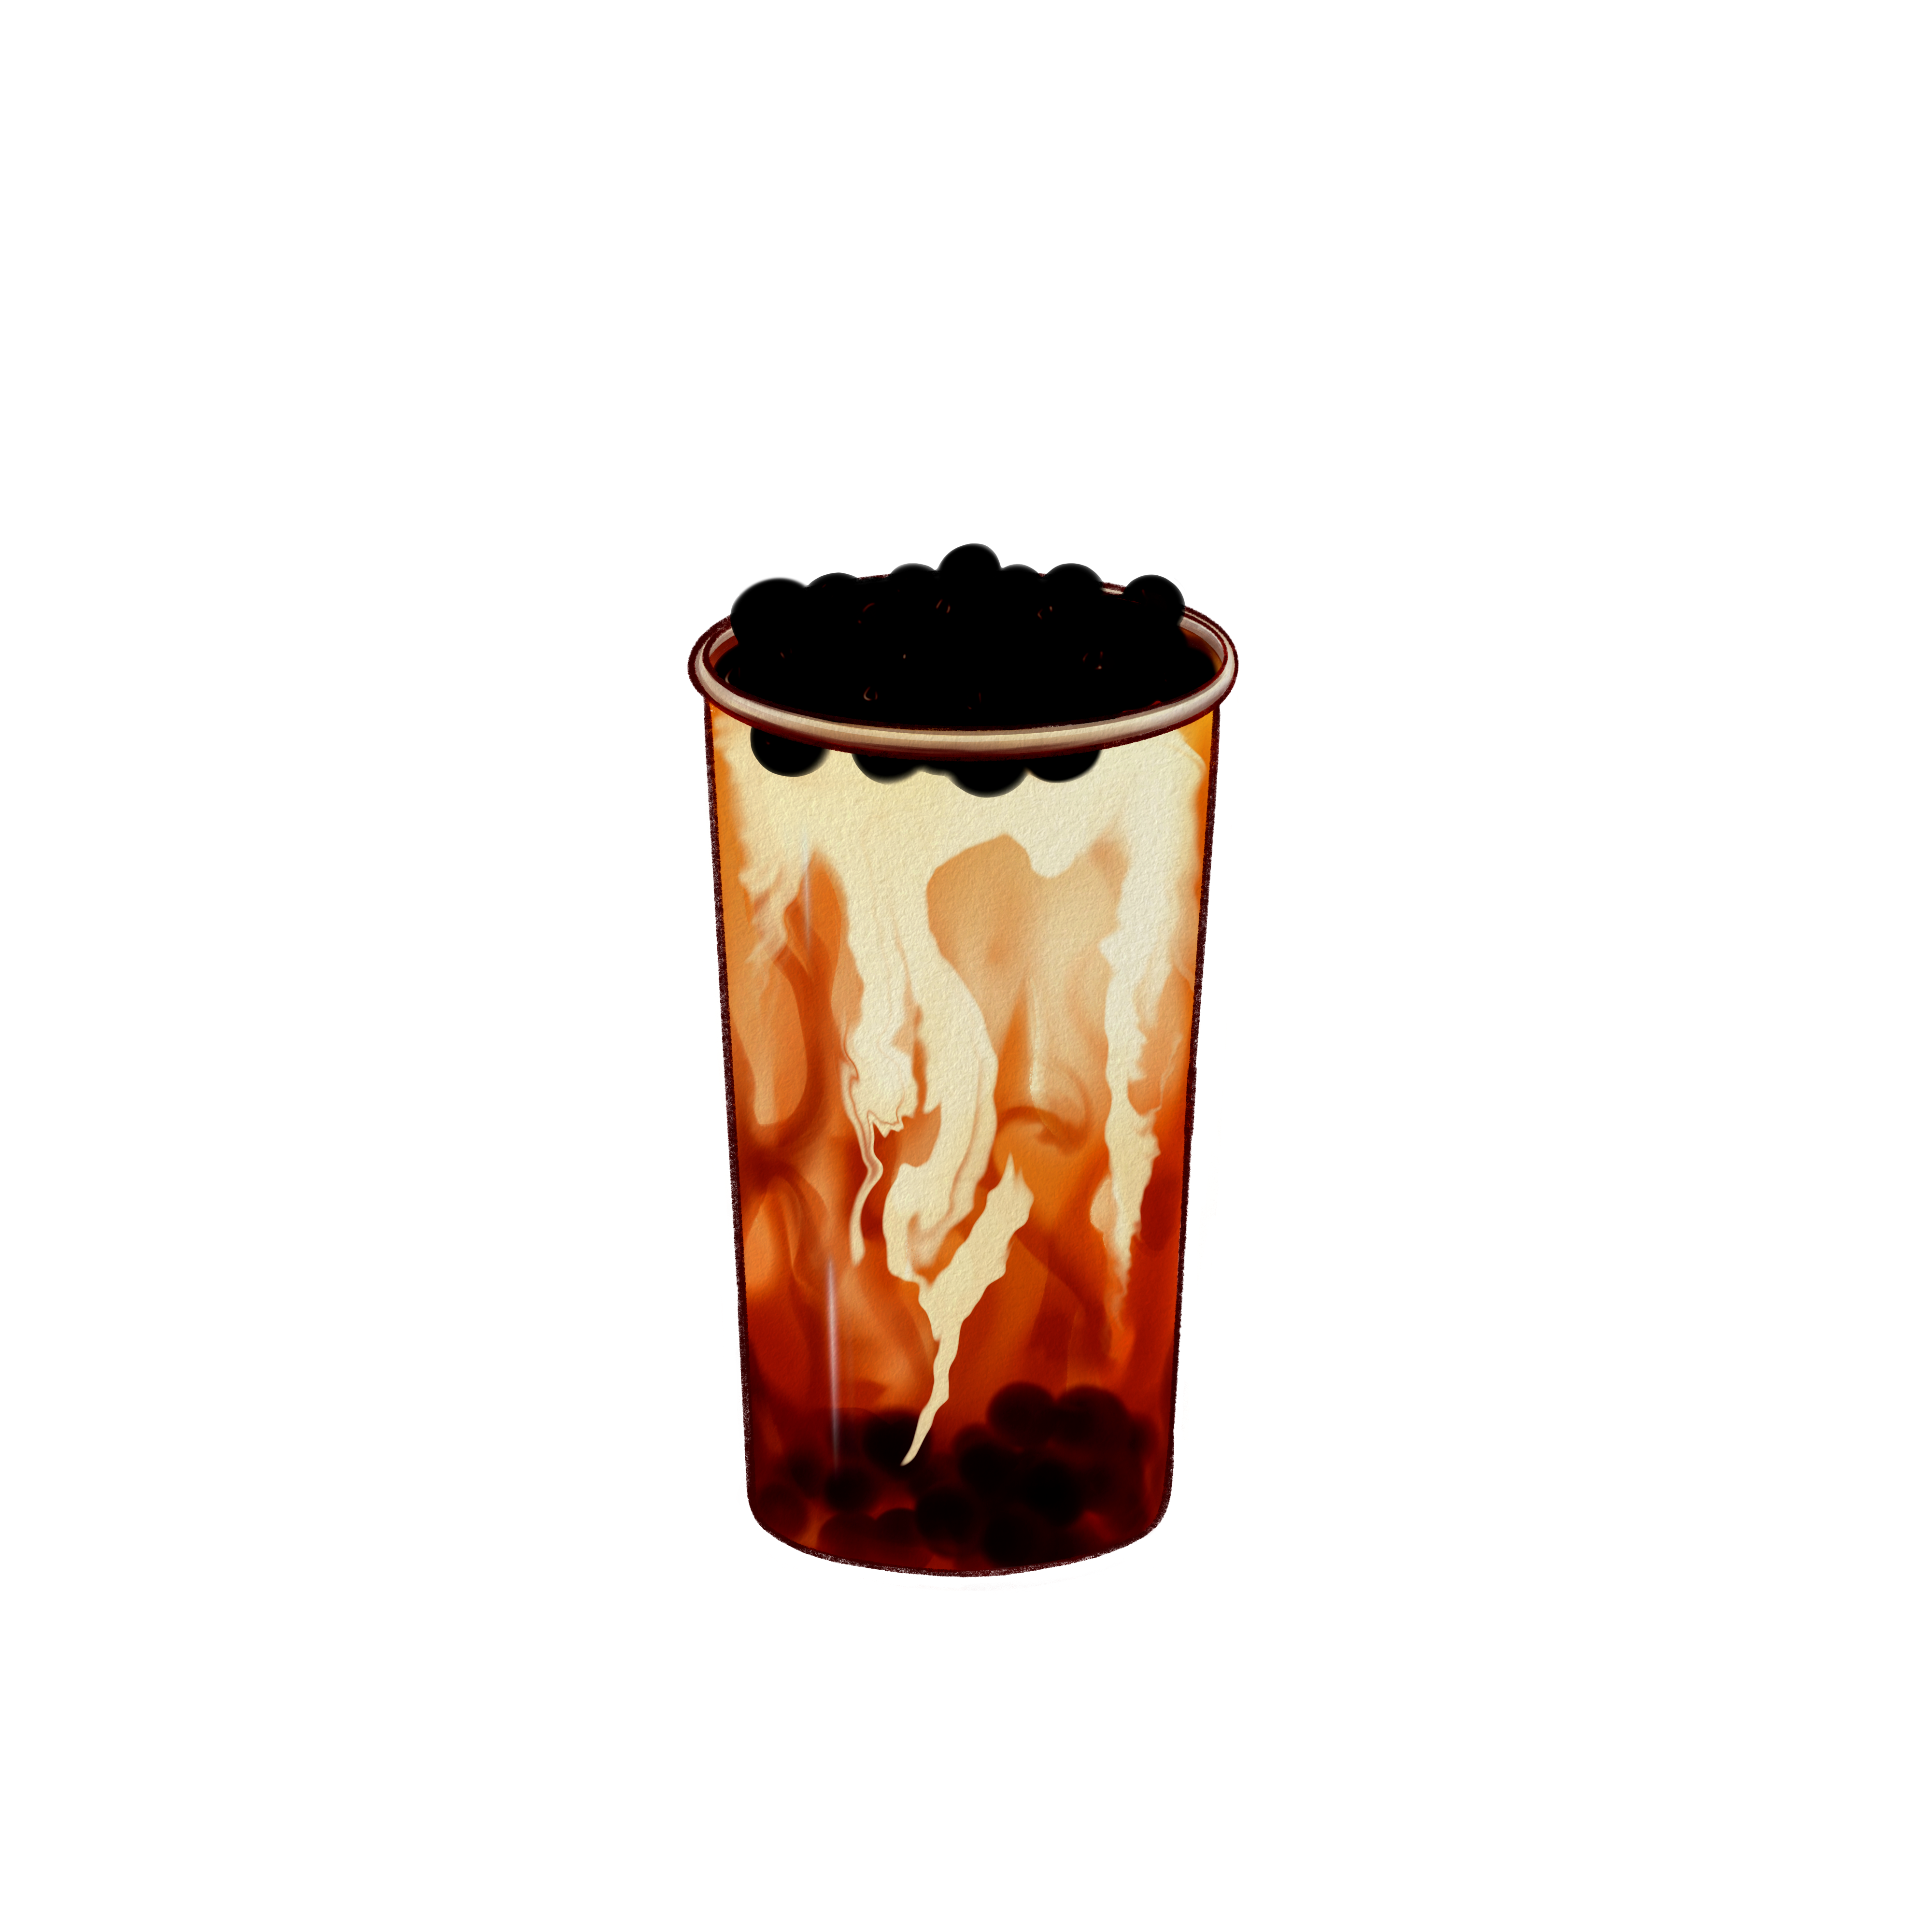 A digital illustration of a brown sugar bubble tea with pearls on top